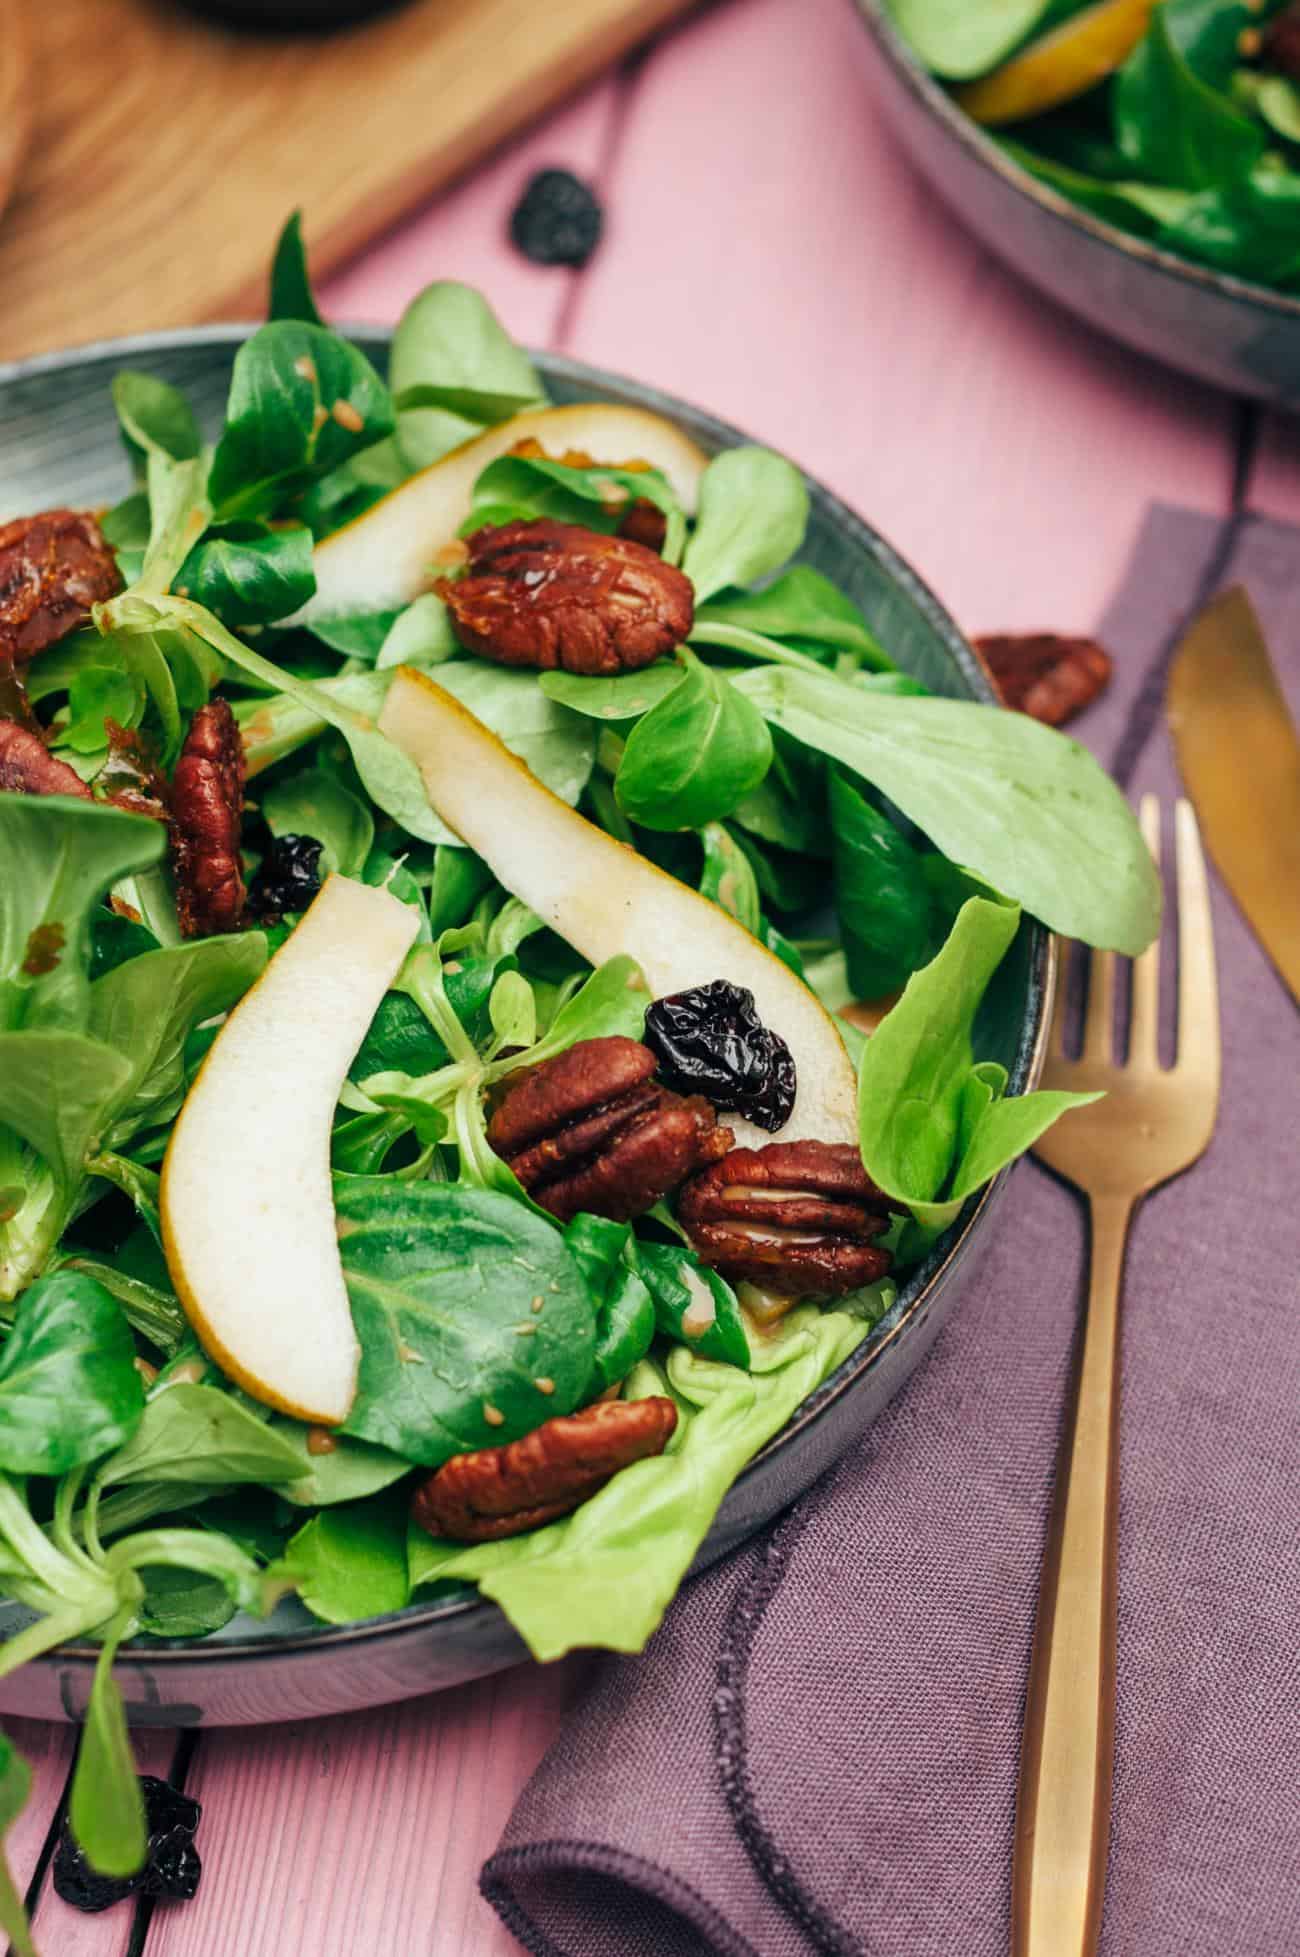 Pear salad with caramelized pecans and dried cherries recipe